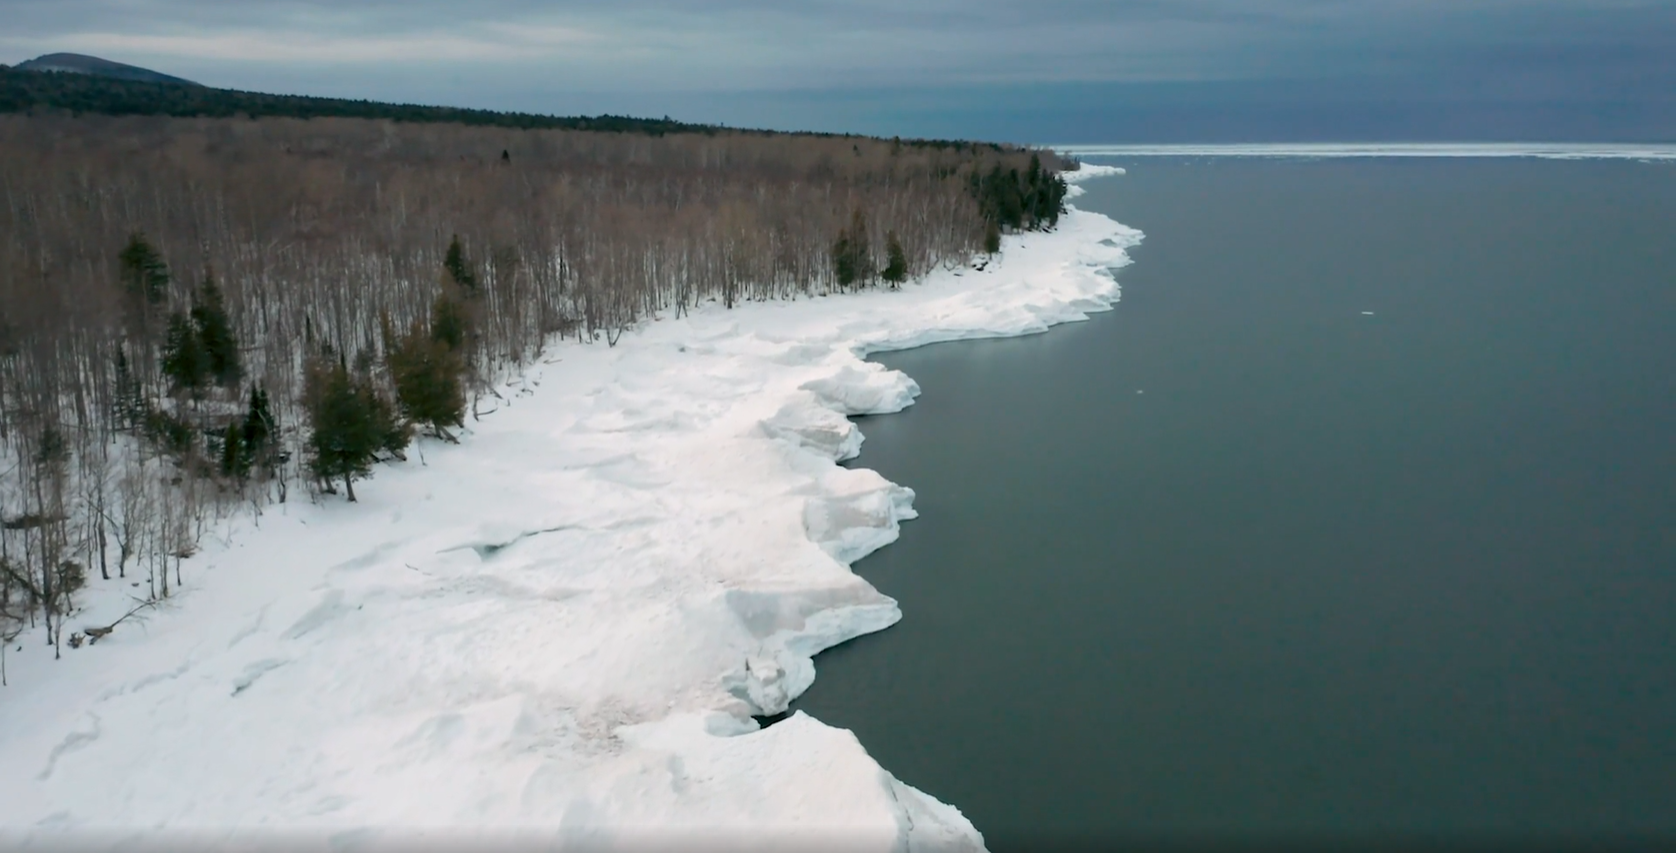 The icy shores of Lake Superior this winter. Image by Zbigniew Bzdak/Chicago Tribune. United States, 2020.